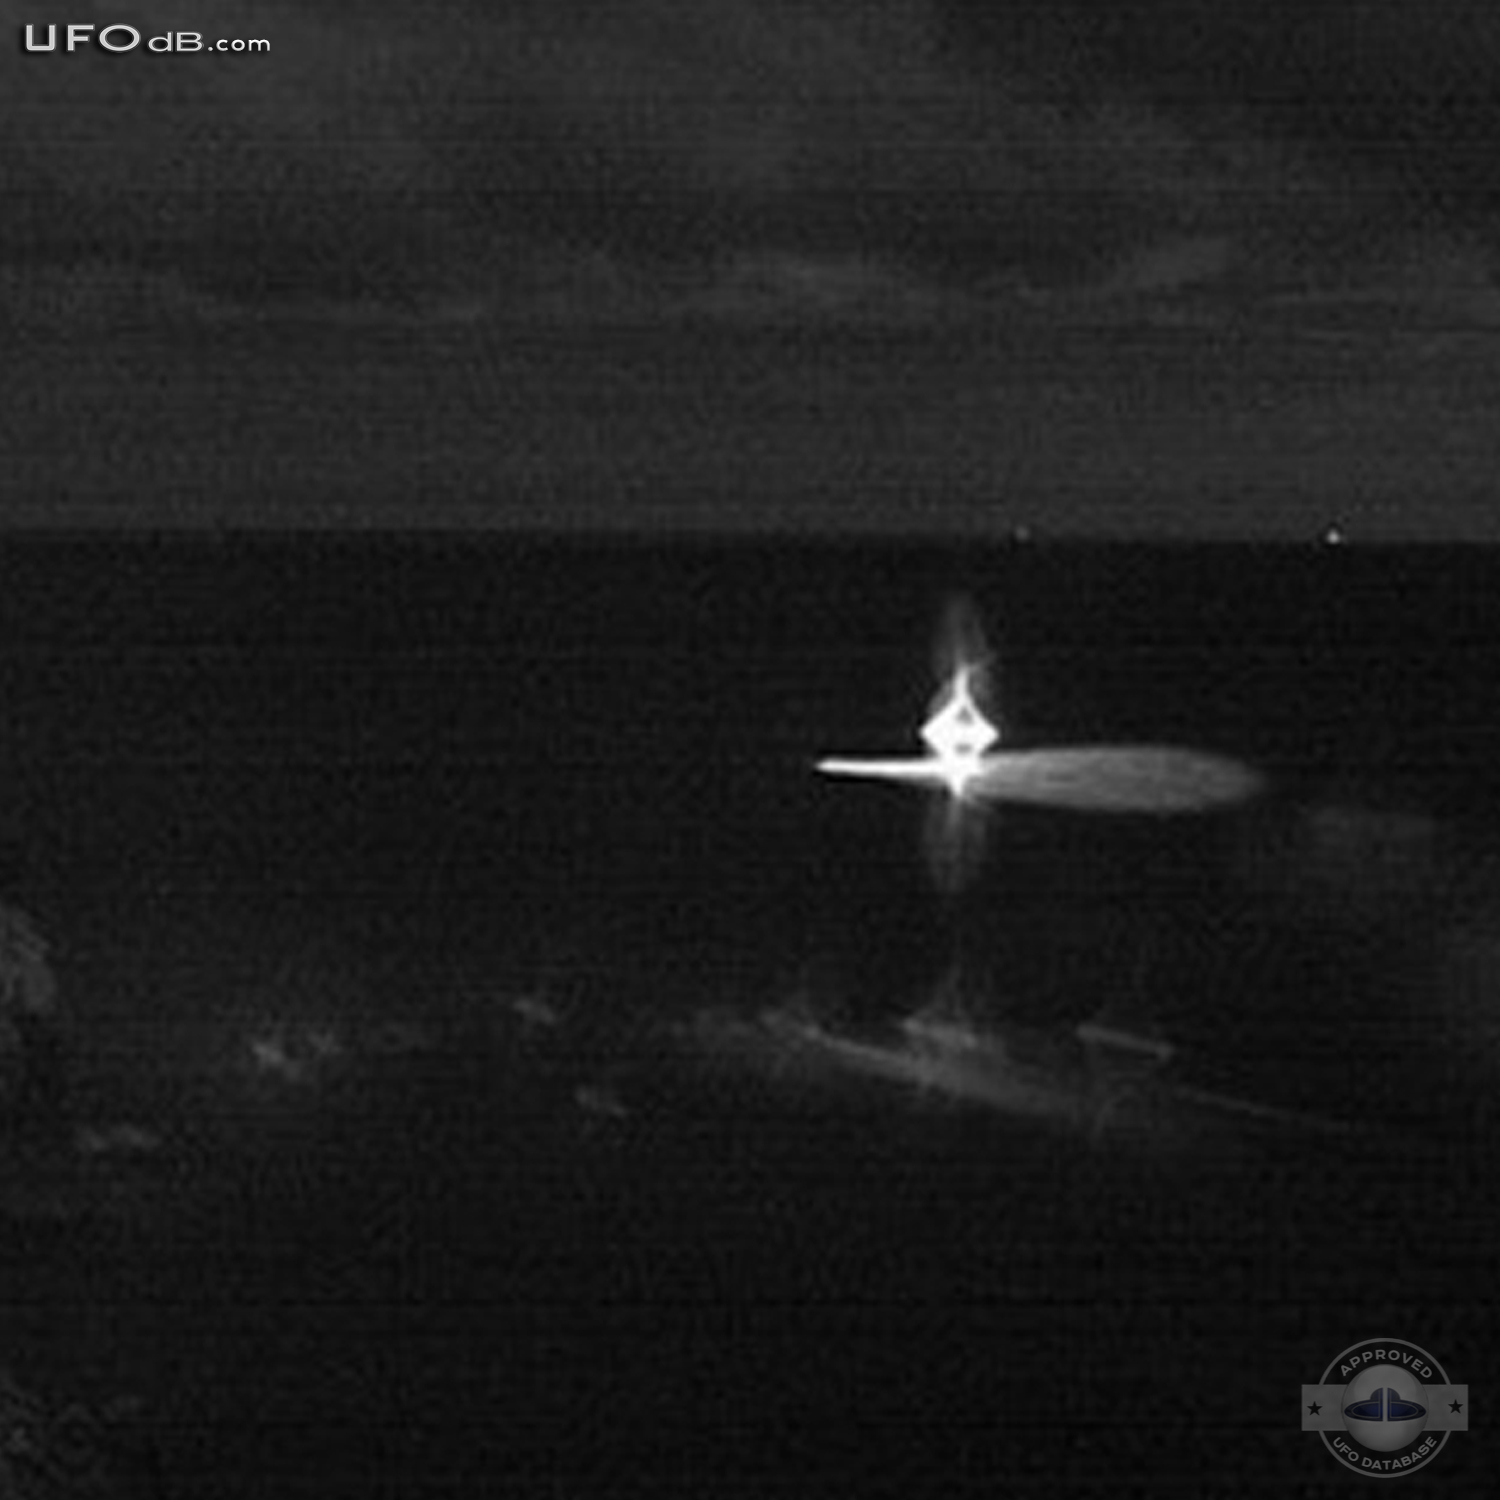 Santa Cesarea Terme floating UFO caught on Cam | Italy | May 17 2011 UFO Picture #295-3